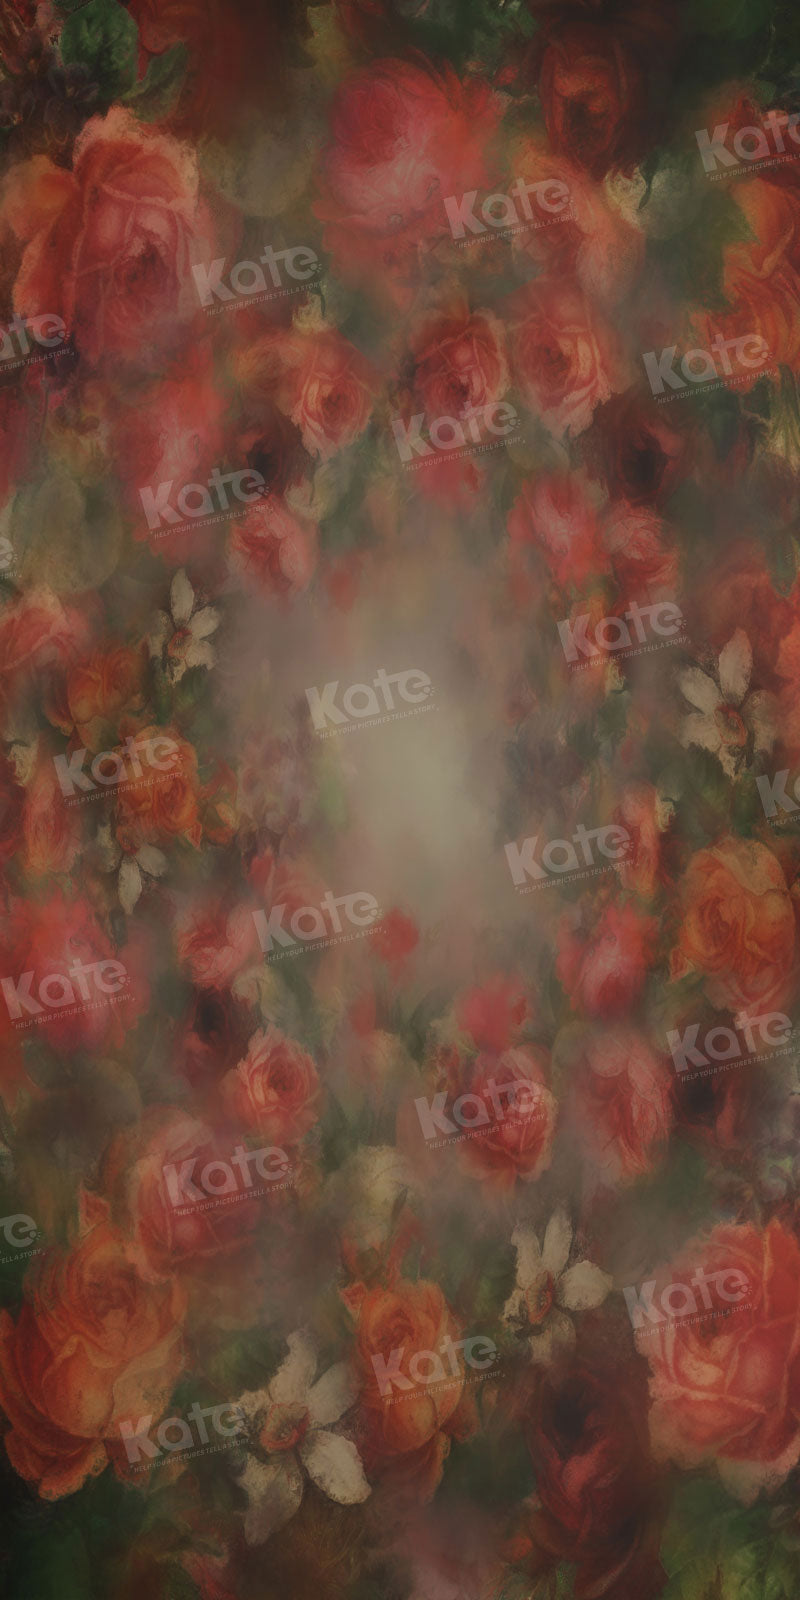 Kate Sweep Abstract Floral Fine Art Backdrop for Photography